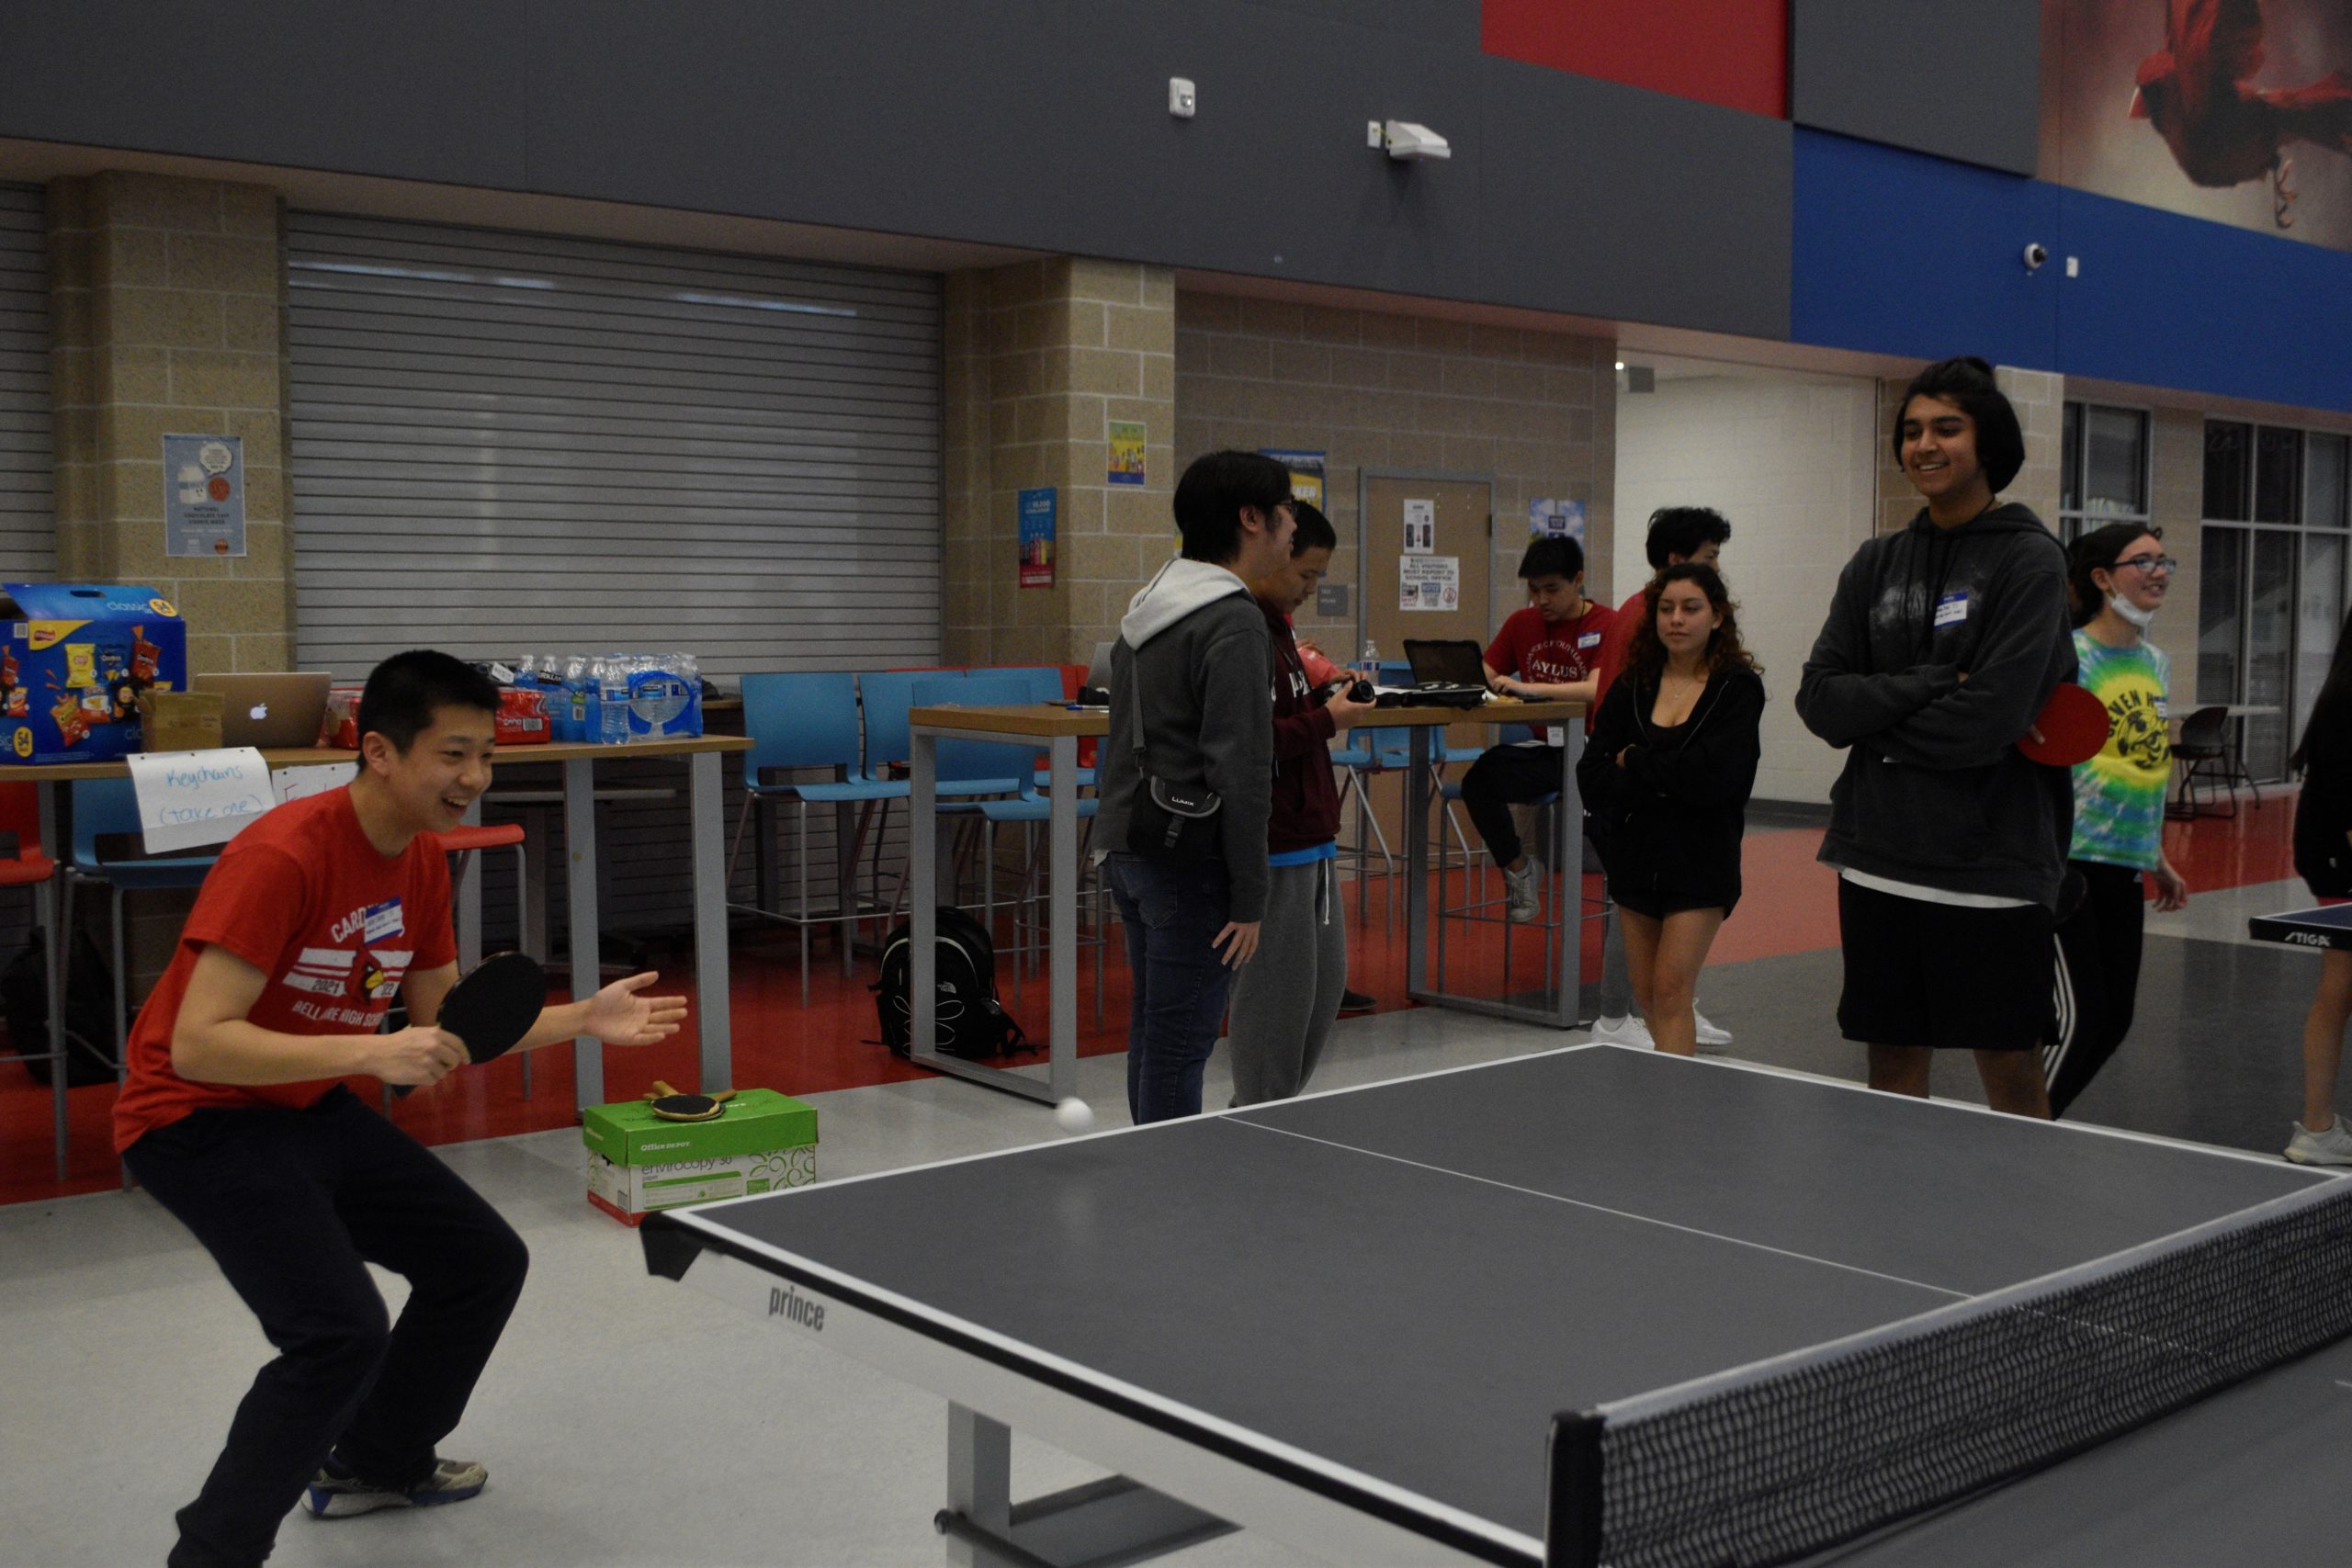 Sophomore Alex Tang plays in a singles round on March 9. His partner, sophomore Pranay Passi, stood on the side coaching him while watching the match.